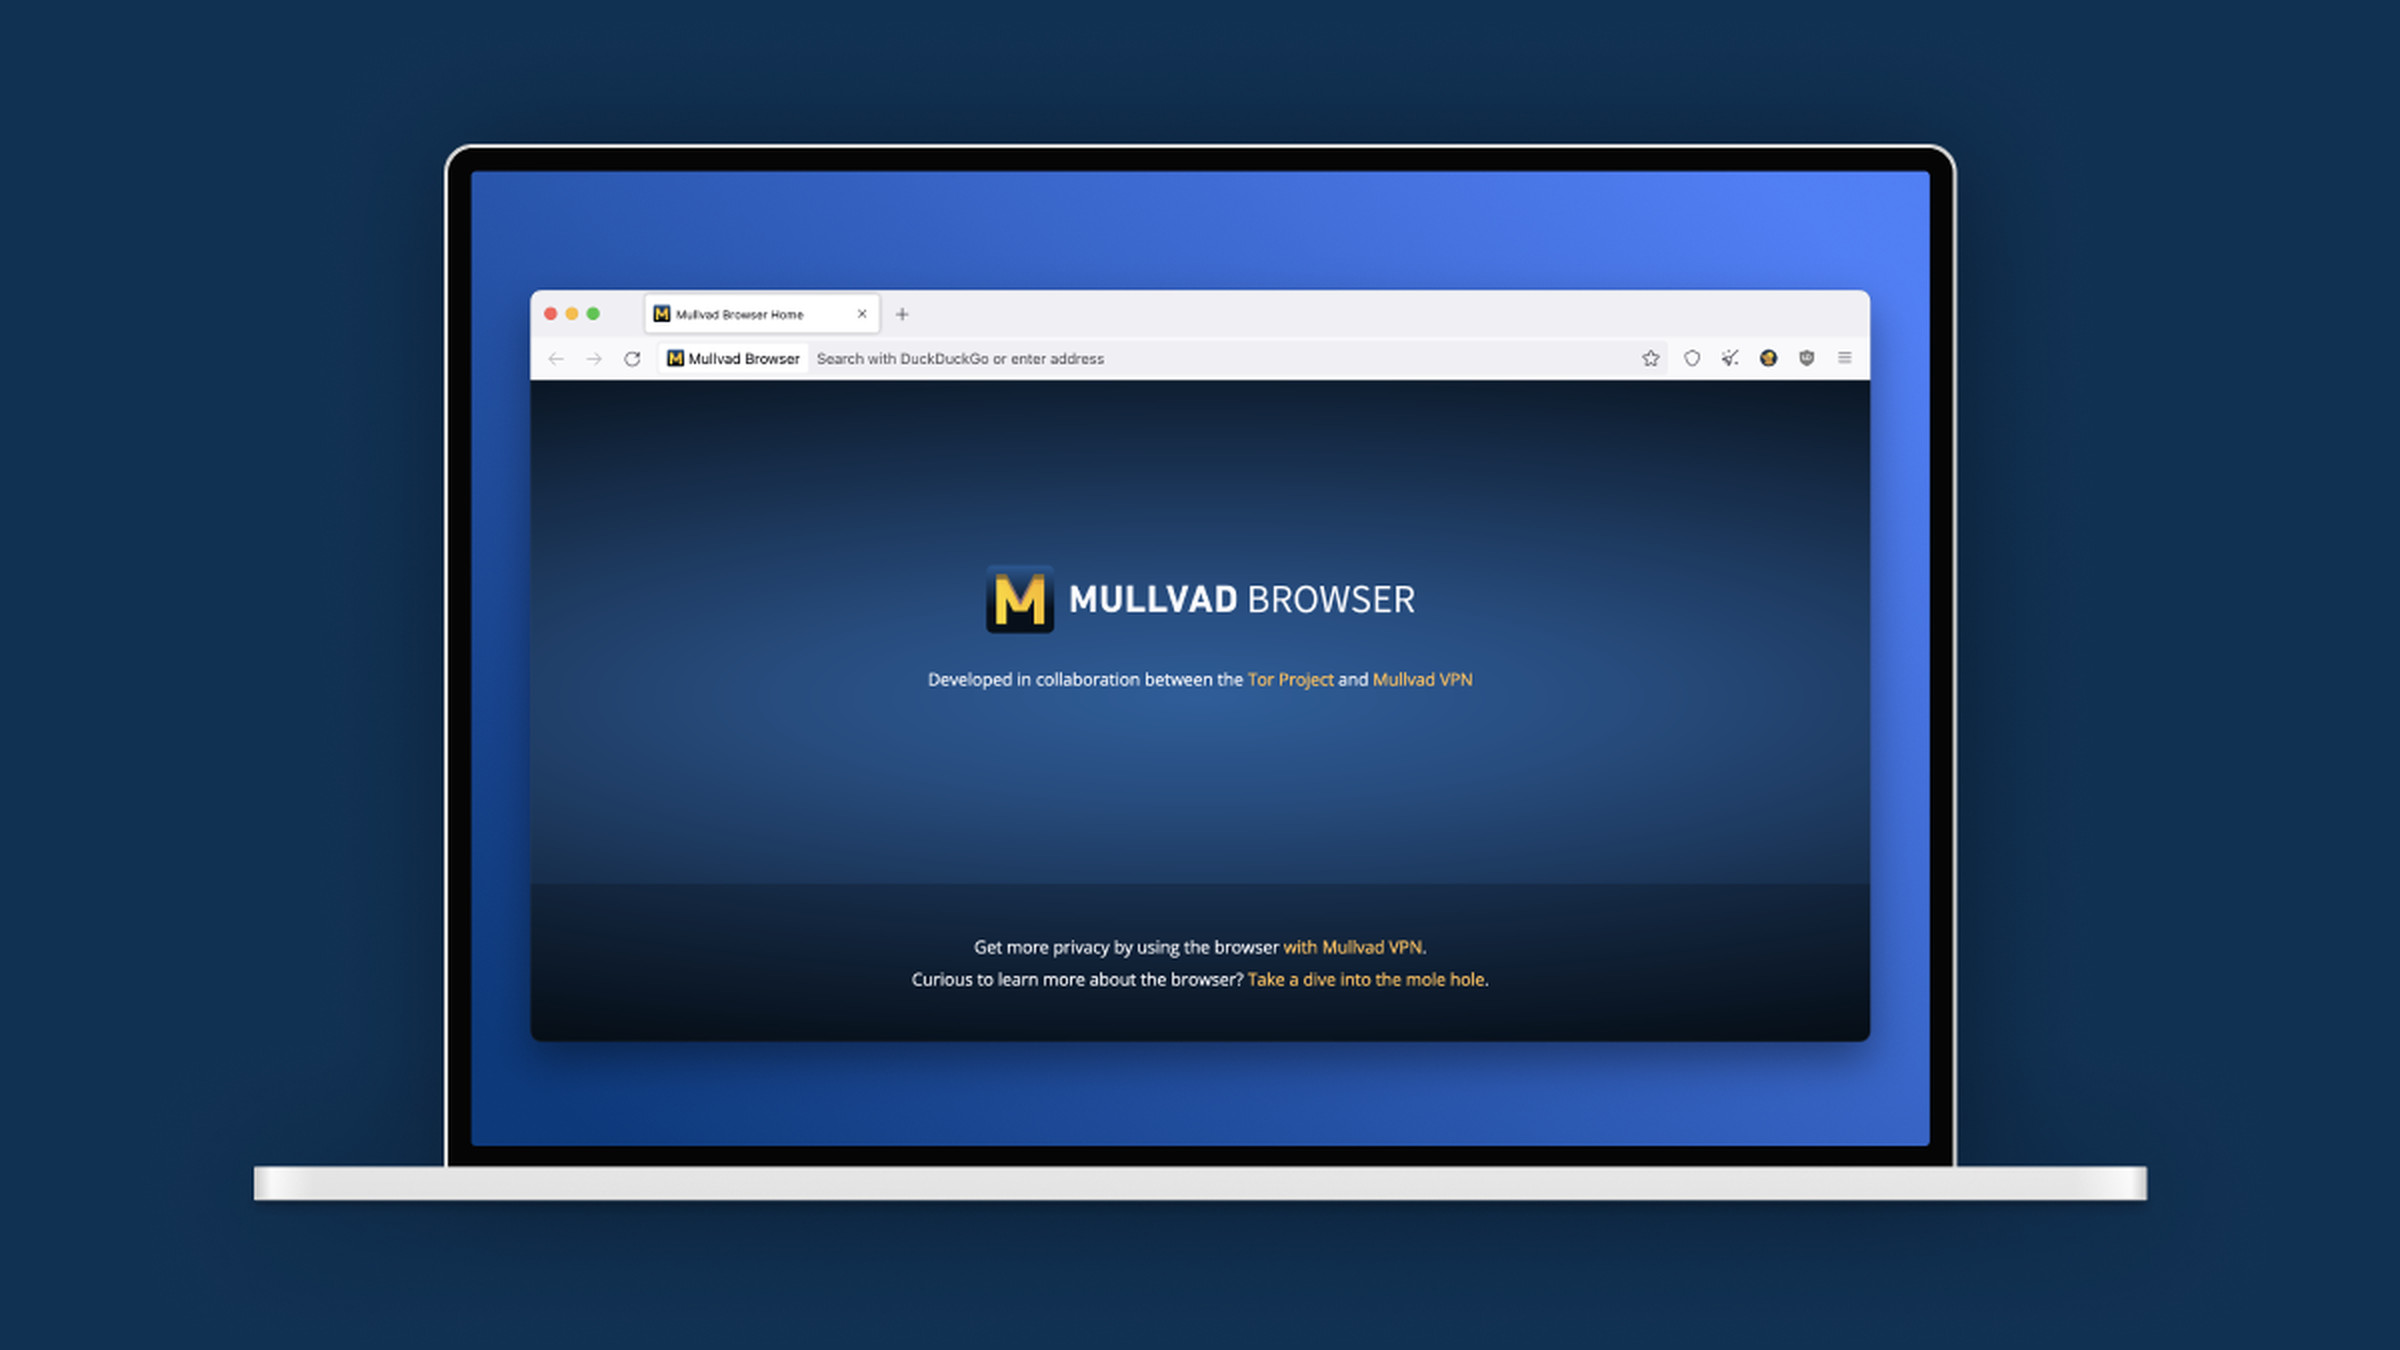 Screenshot of the Mullvad browser’s welcome screen.